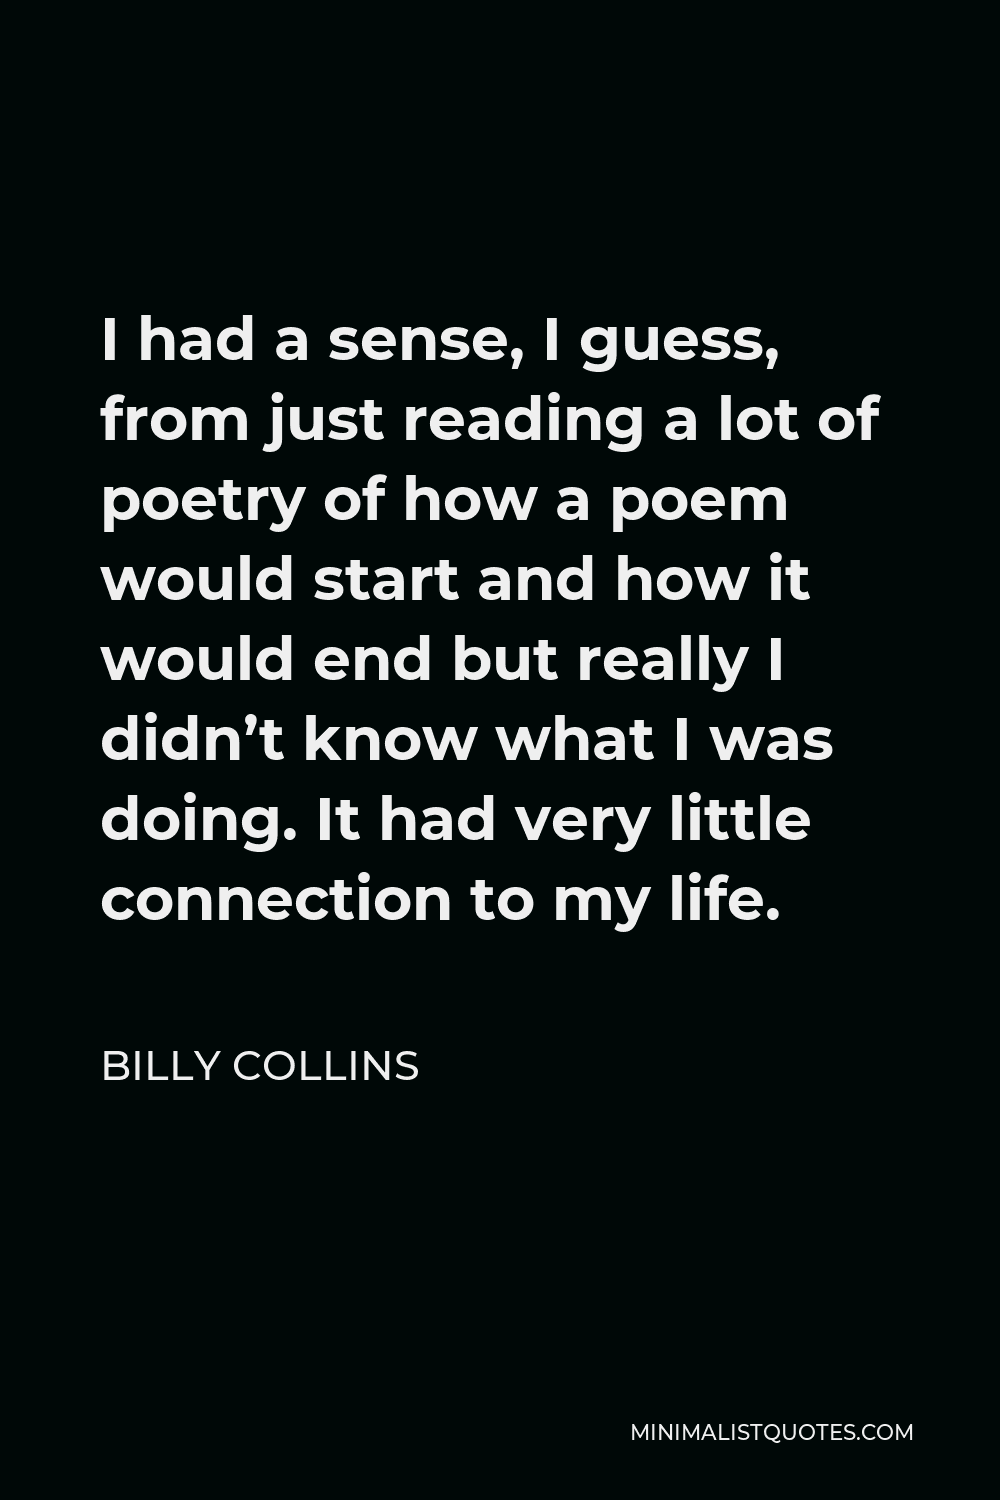 Billy Collins Quote - I had a sense, I guess, from just reading a lot of poetry of how a poem would start and how it would end but really I didn’t know what I was doing. It had very little connection to my life.